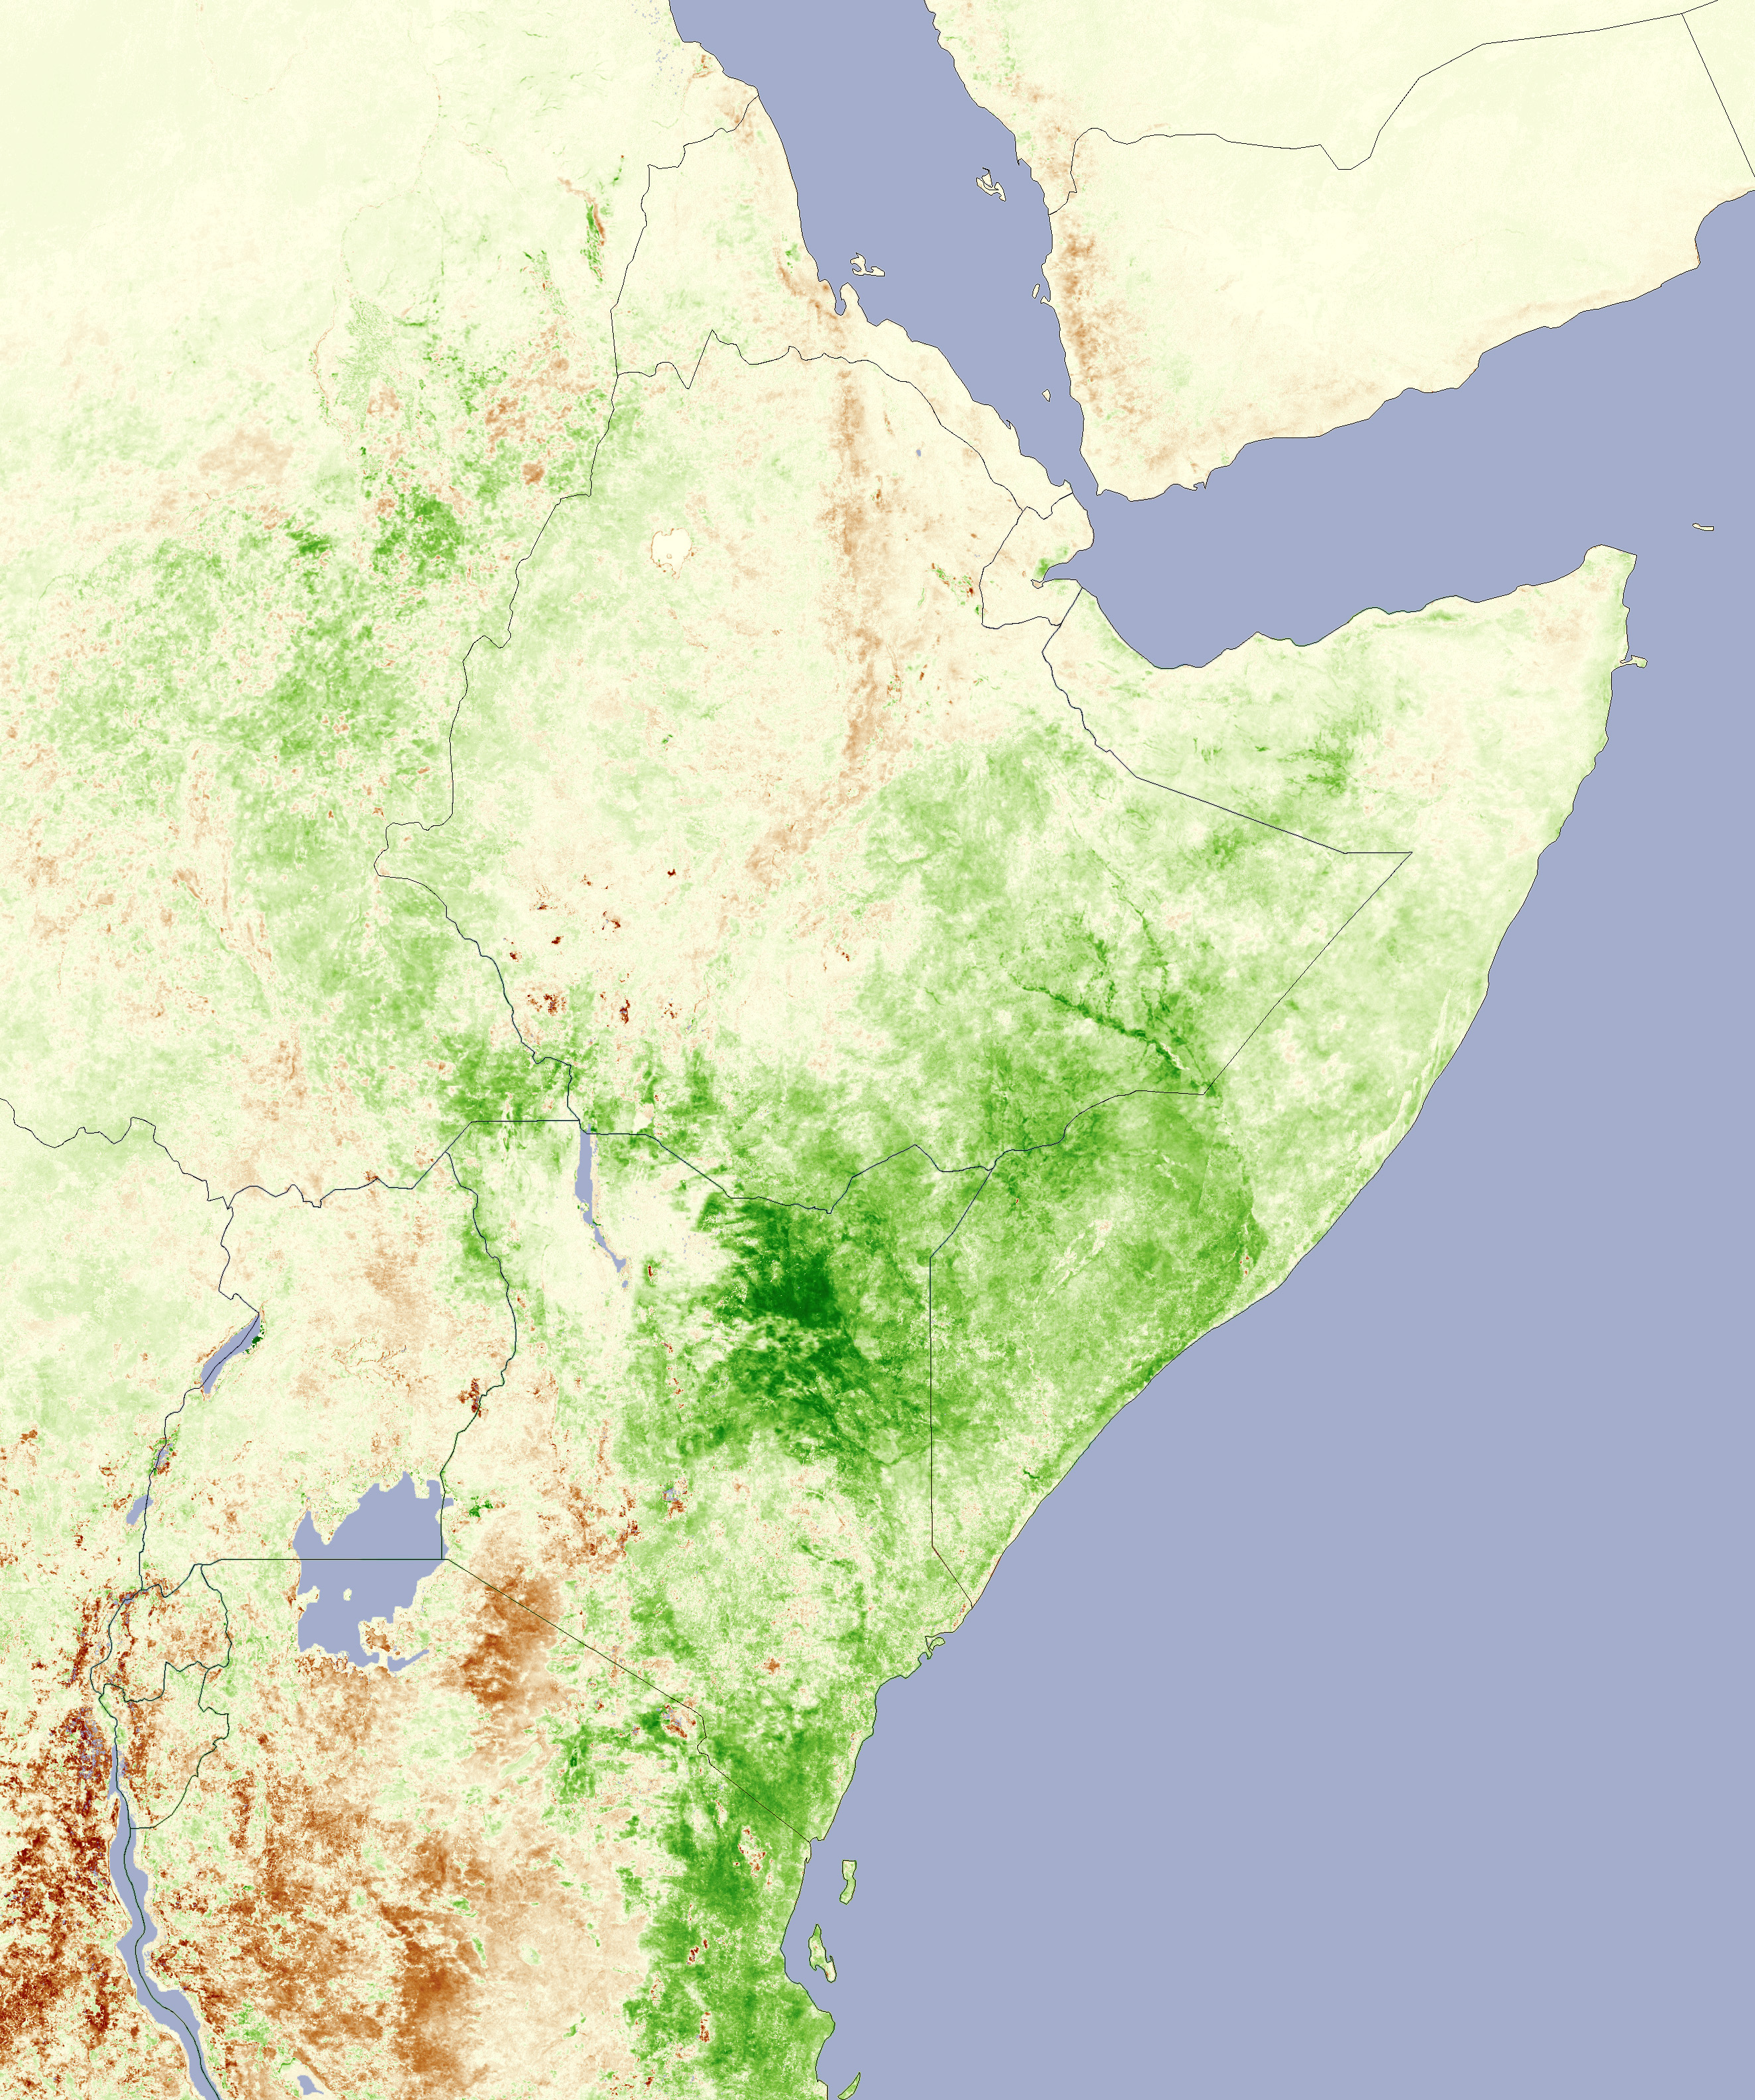 East Africa Greens Up from Heavy Rains - related image preview